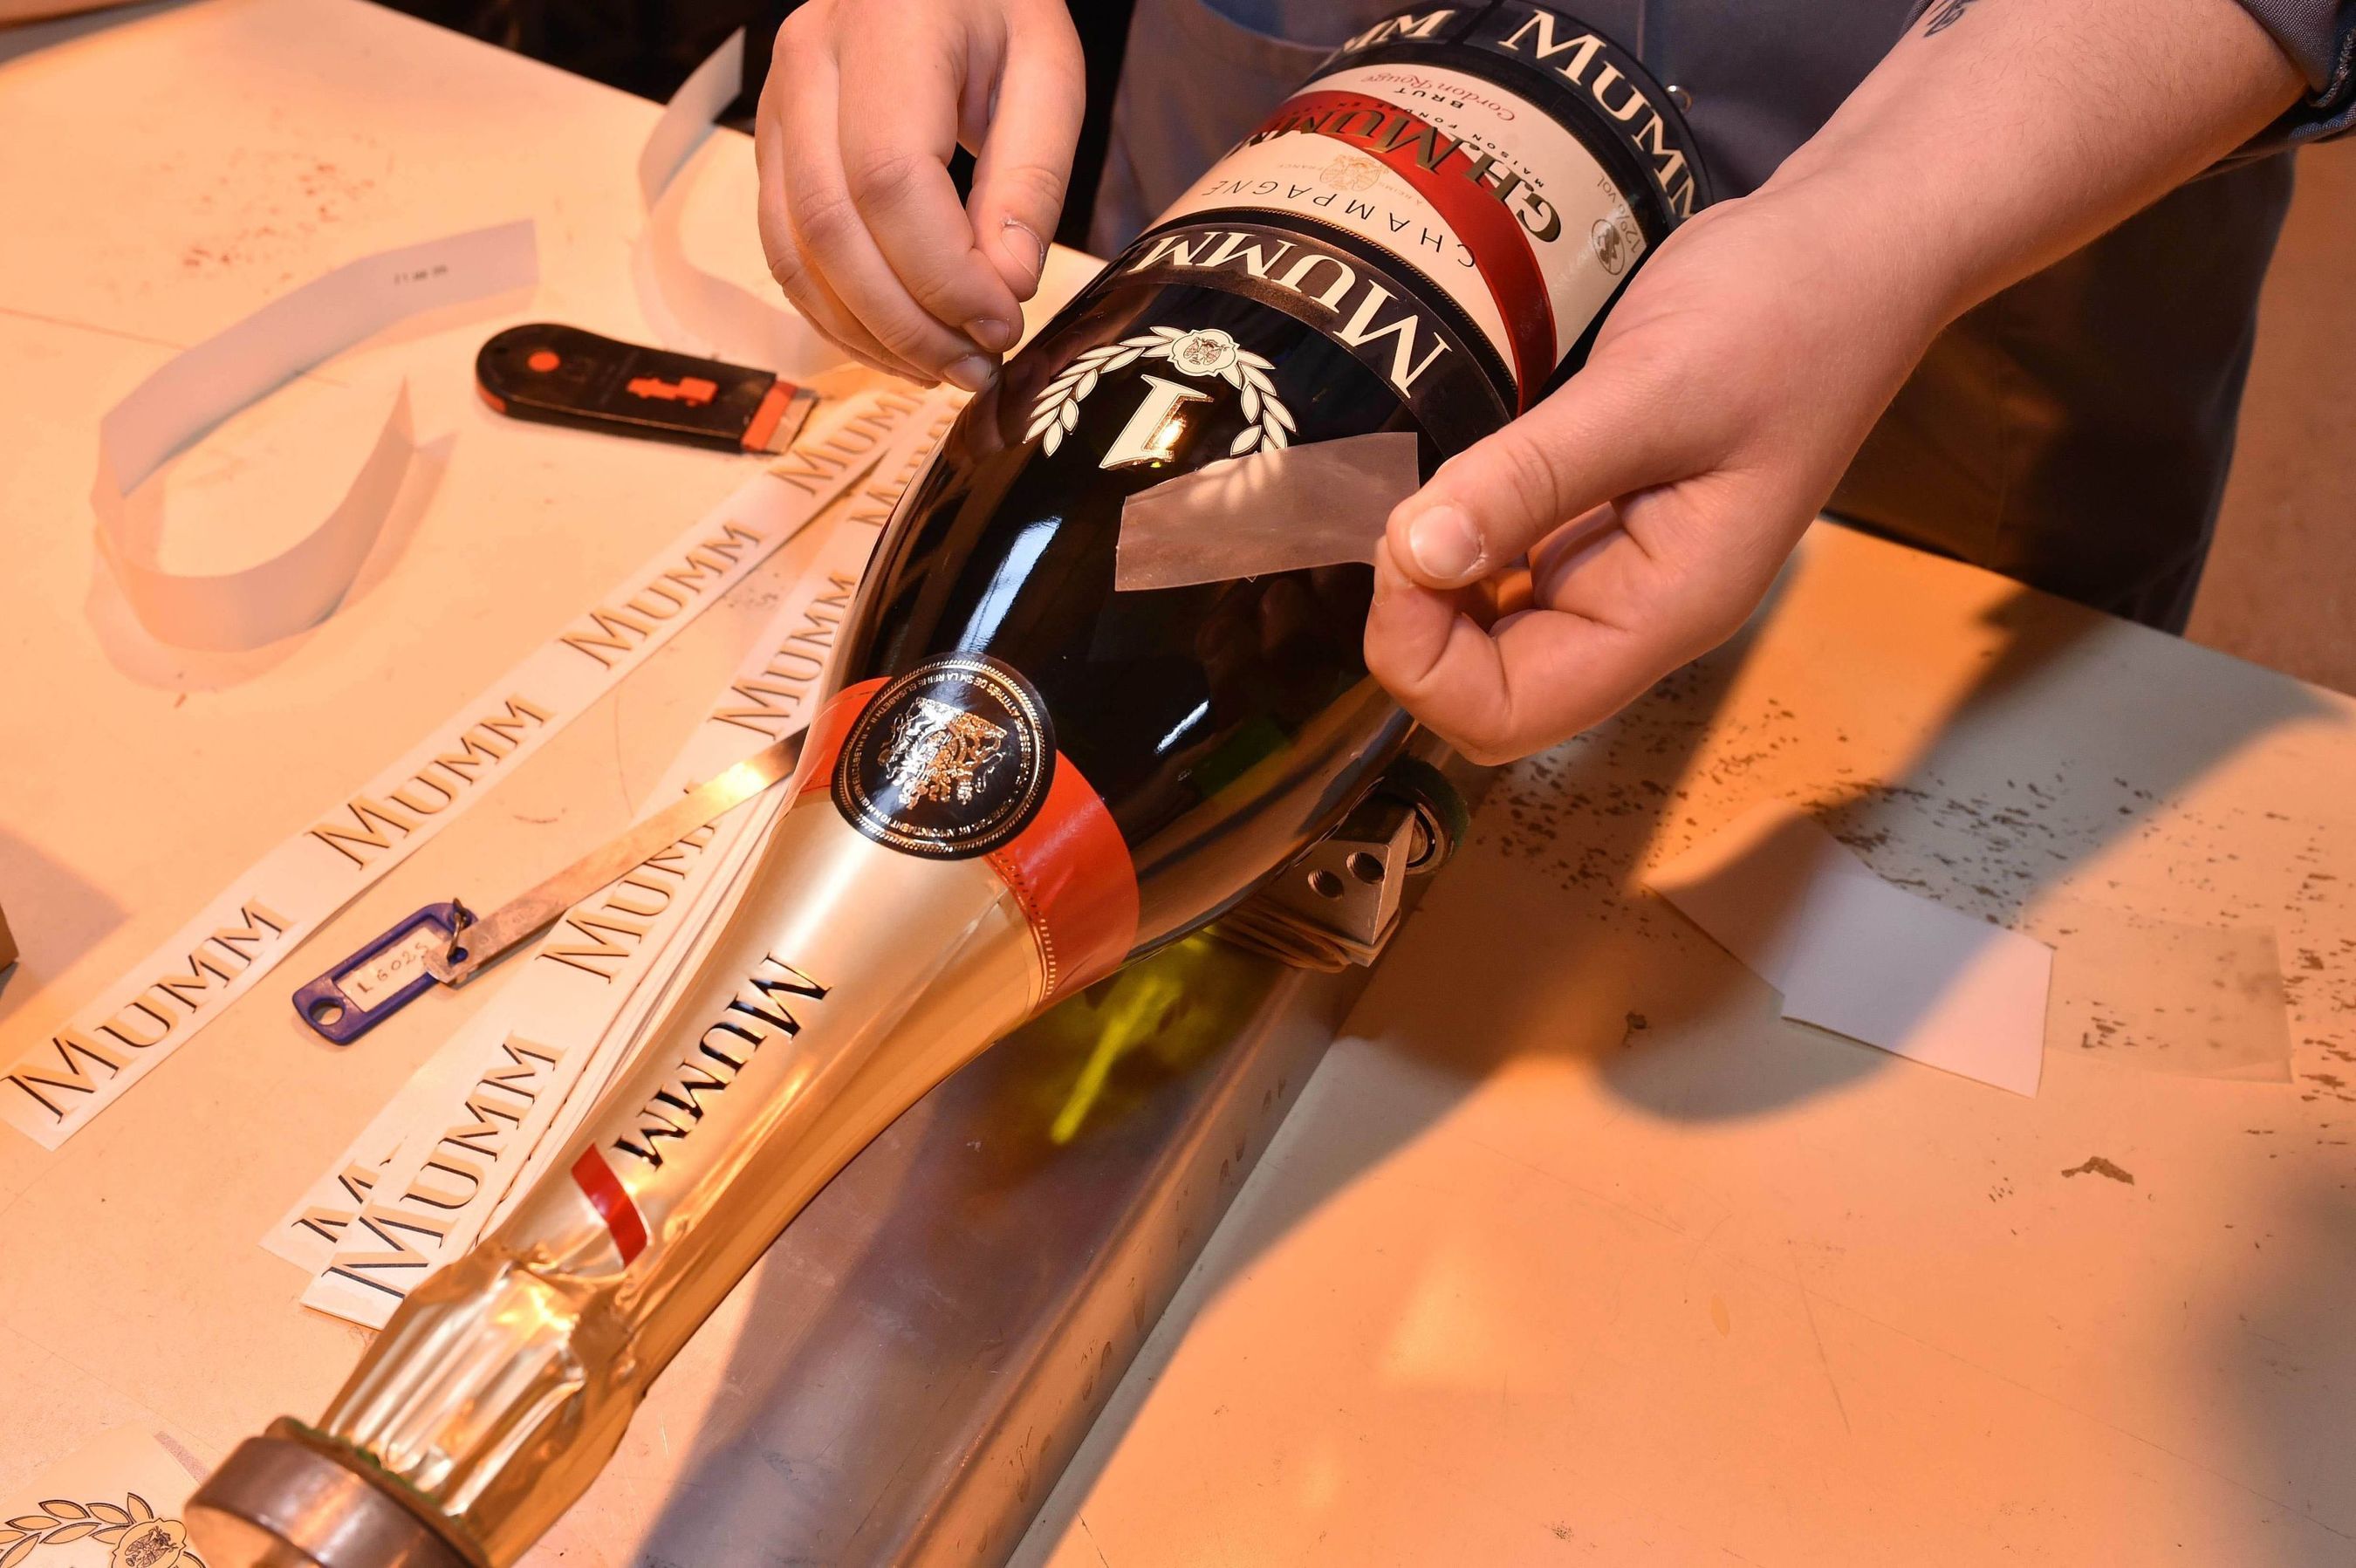 Before beginning its journey to the celebratory podium in Monte Carlo, the final preparations are made to the iconic Jeroboam of Cordon Rouge that will be awarded to the winner of the 2015 Monaco Grand Prix. (PRNewsFoto/Maison Mumm)